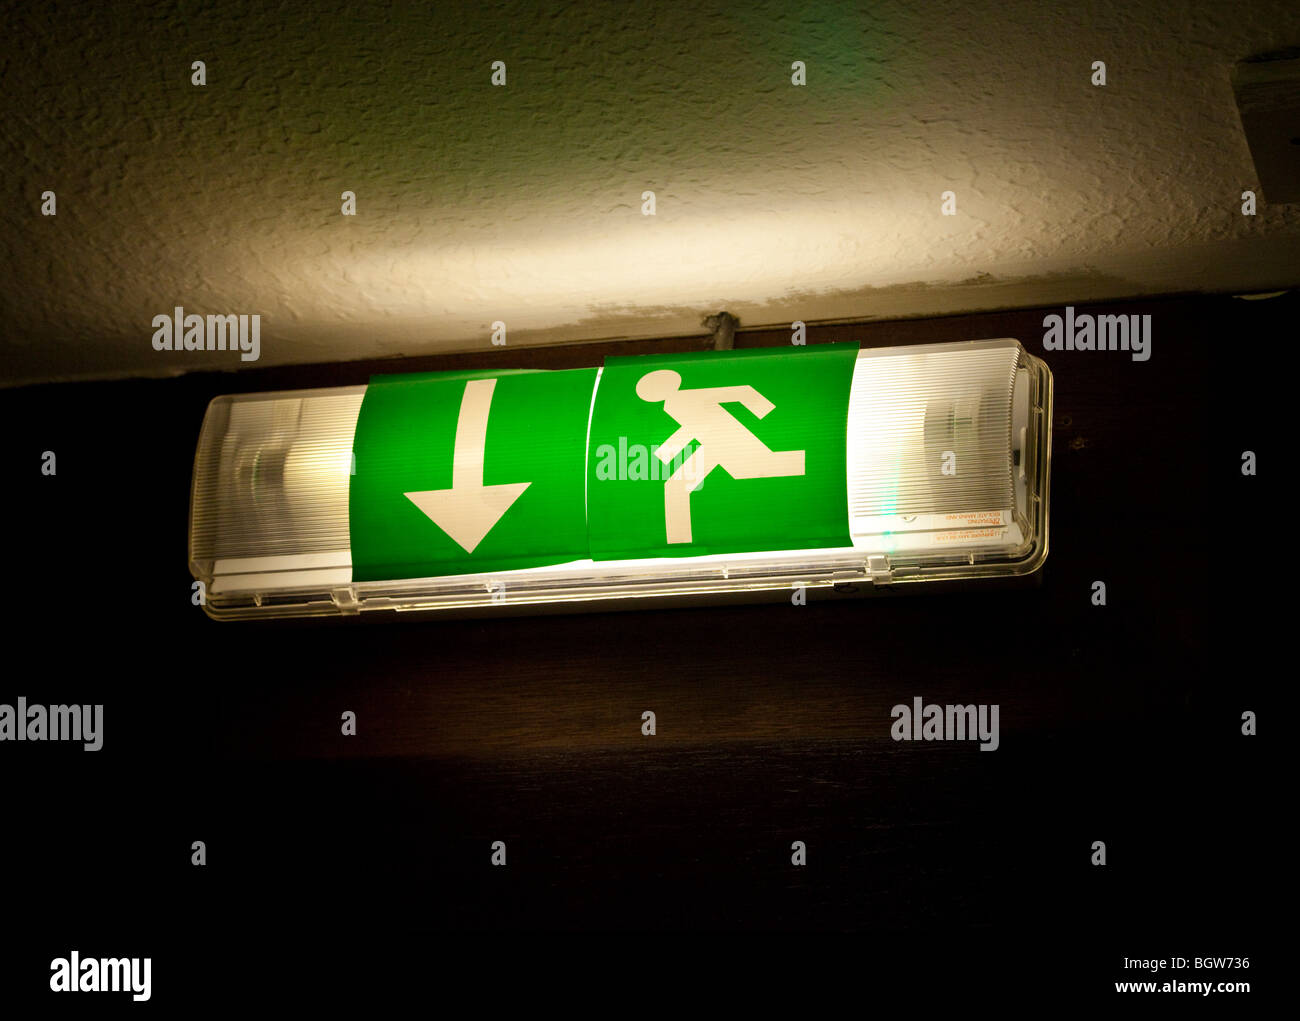 Emergency Exit sign Stock Photo